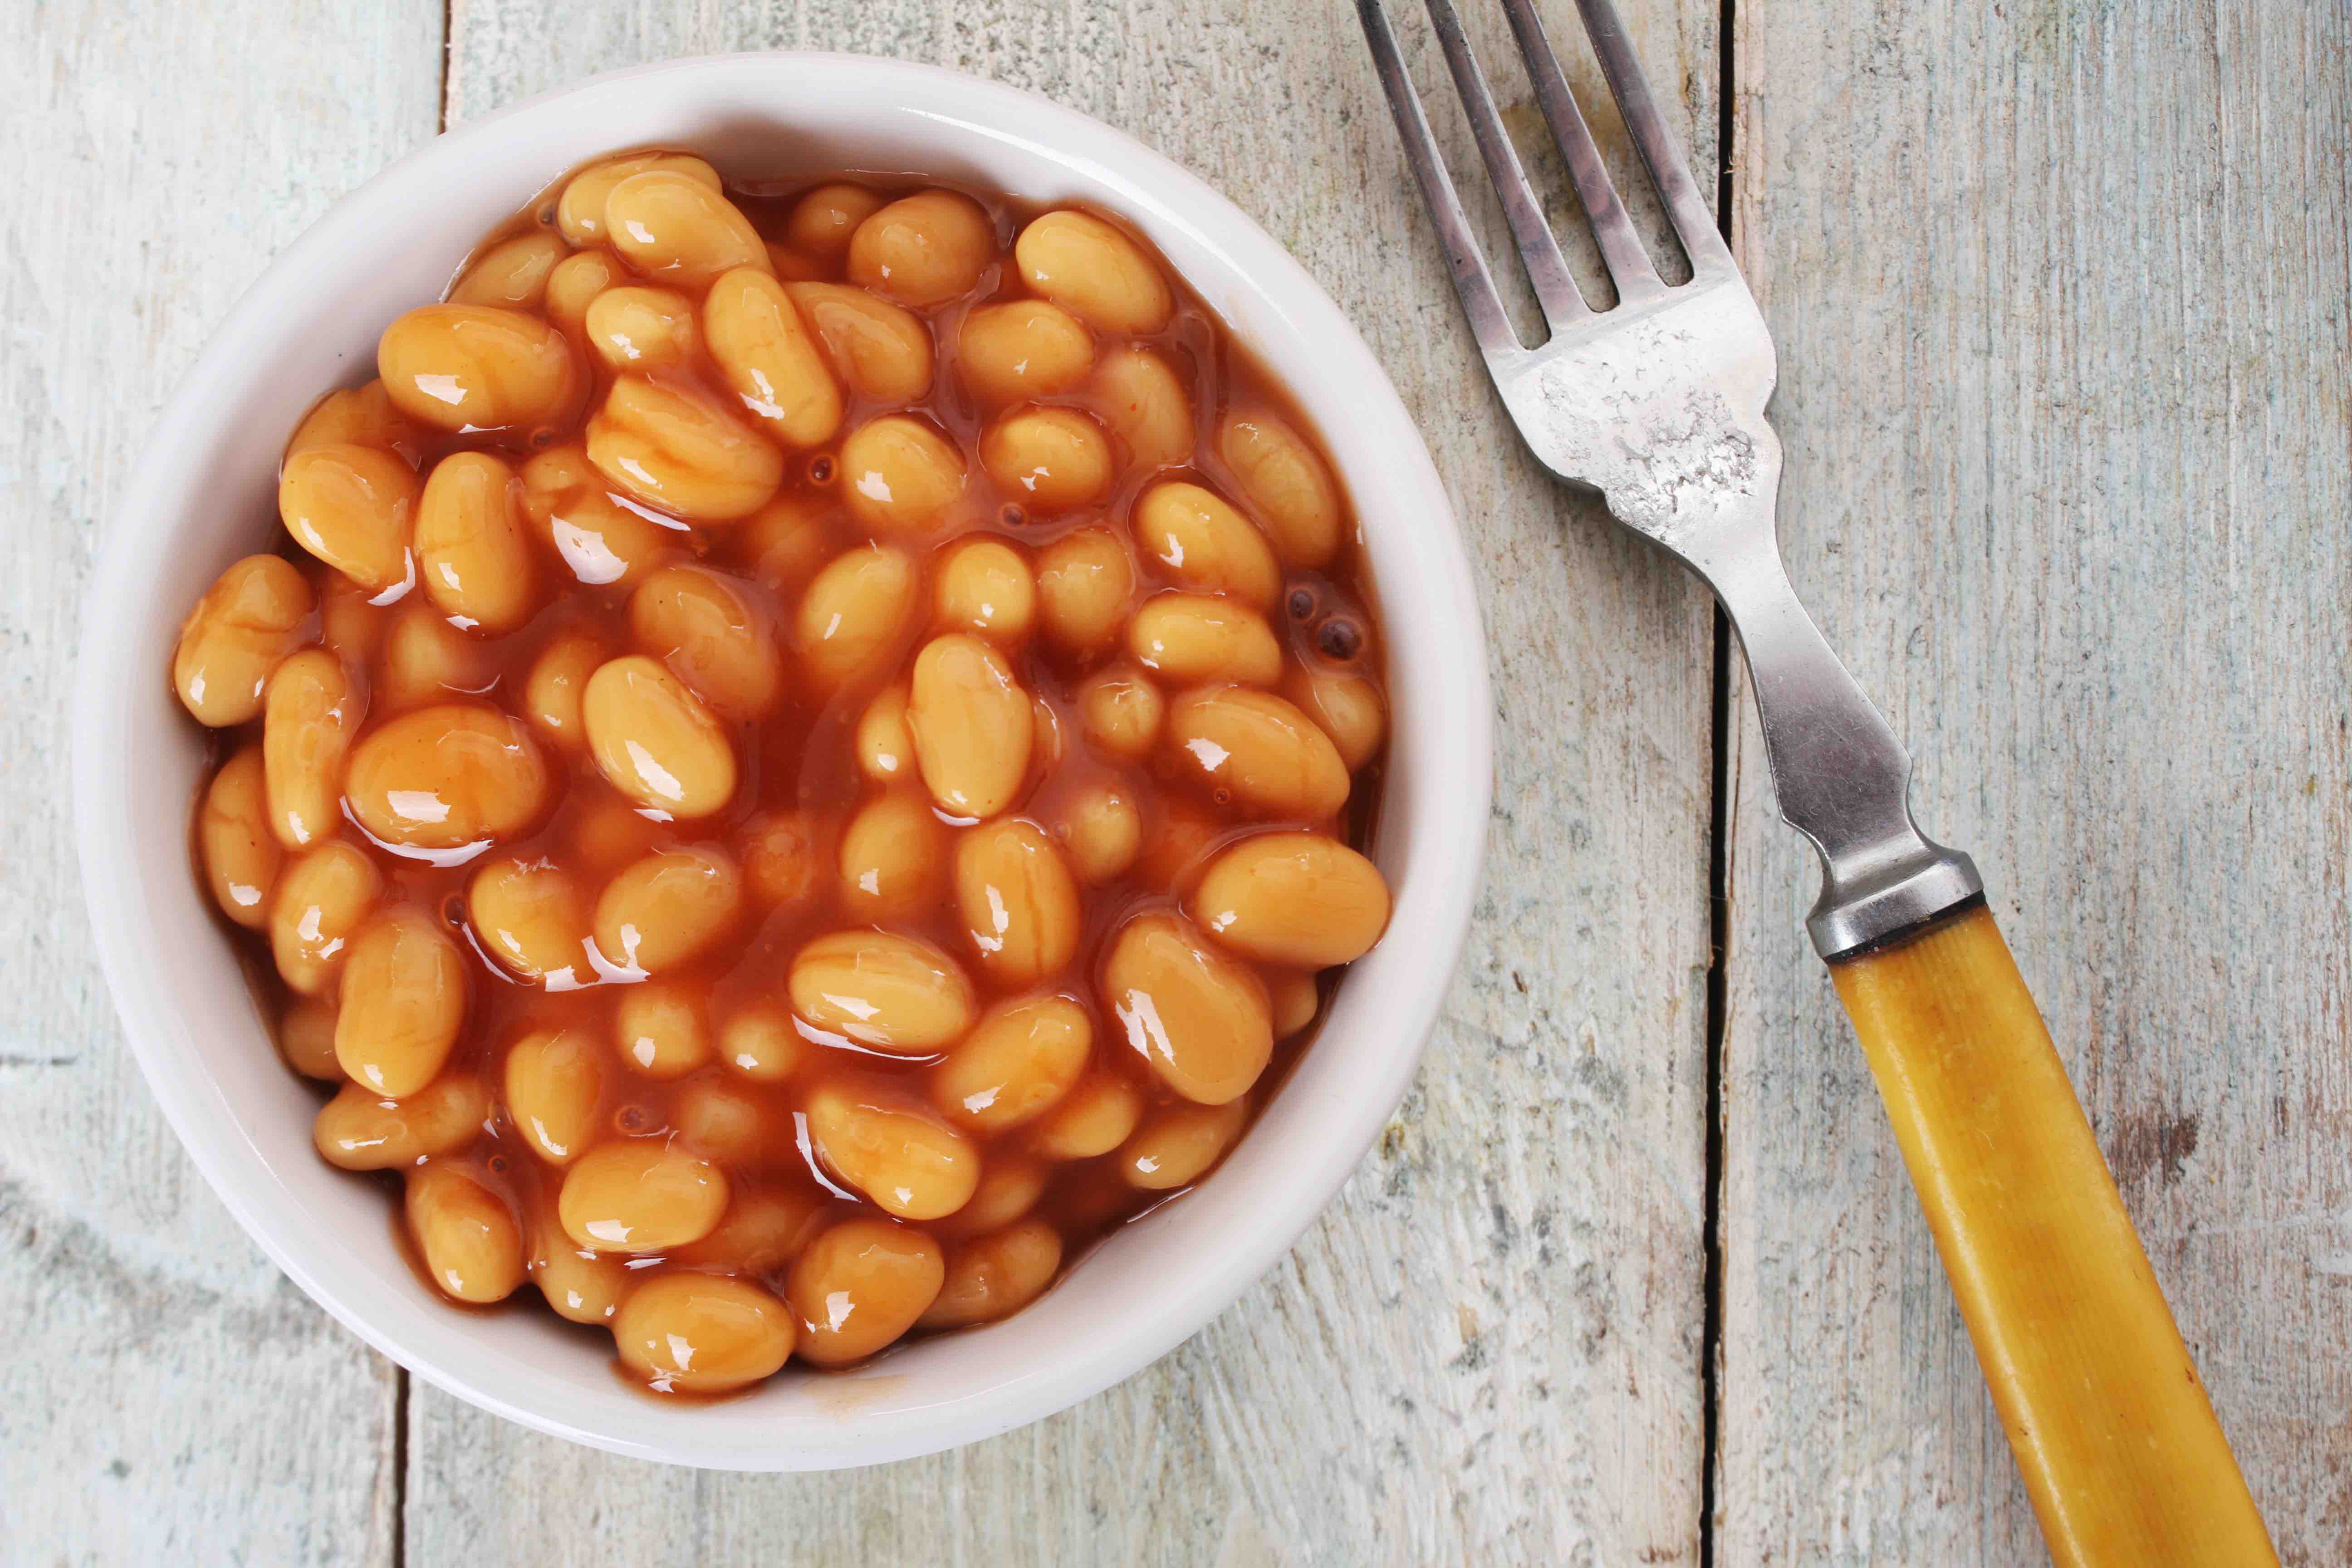 10 Baked Beans Nutrition Facts - Facts.net